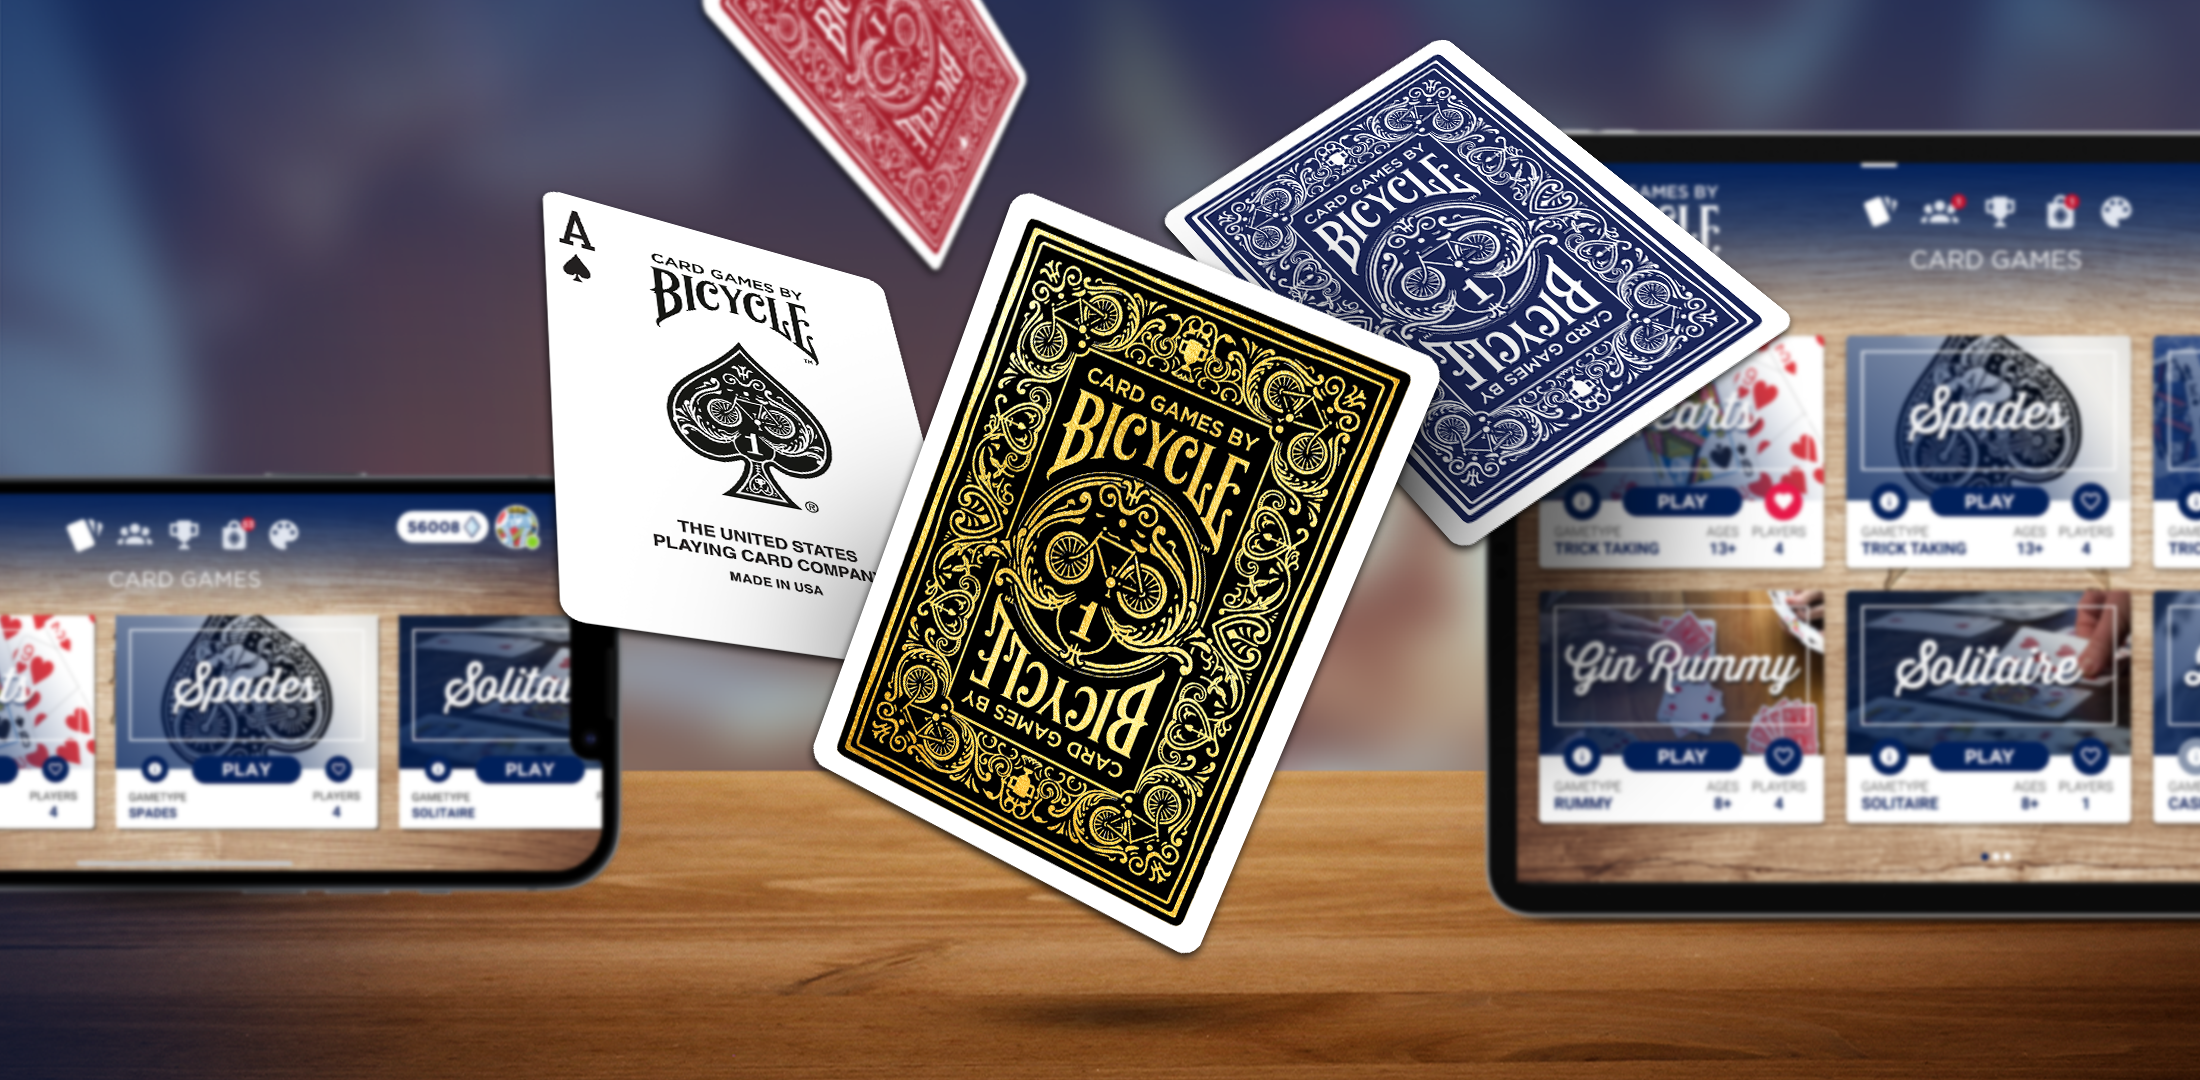 The Card Games by Bicycle app rewards all players on the leaderboard with a unique digital cards, avatars and a table to be used in the app.